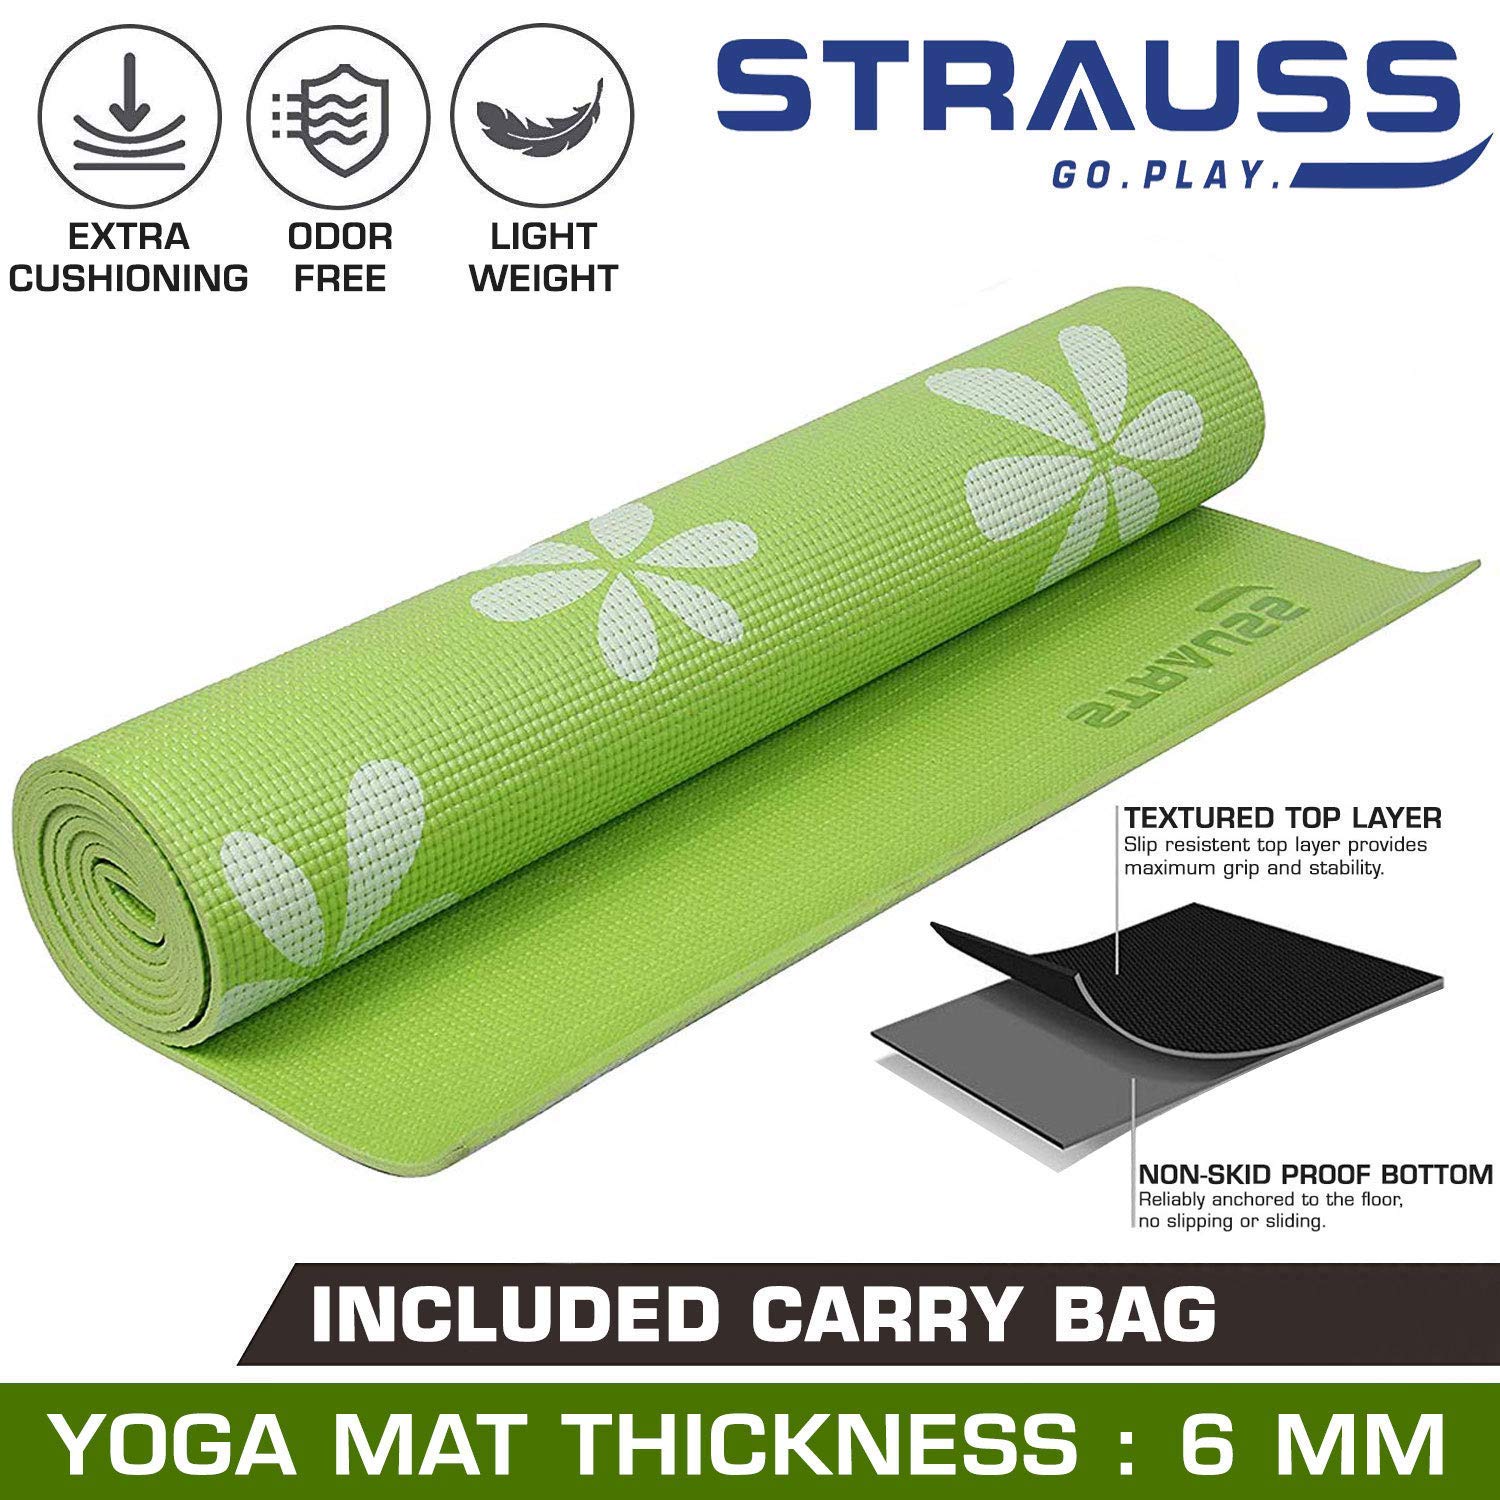 Tesler Strauss Yoga Mat 6MM (Floral Green) and Yoga Knee Pad Cushions, (Blue)